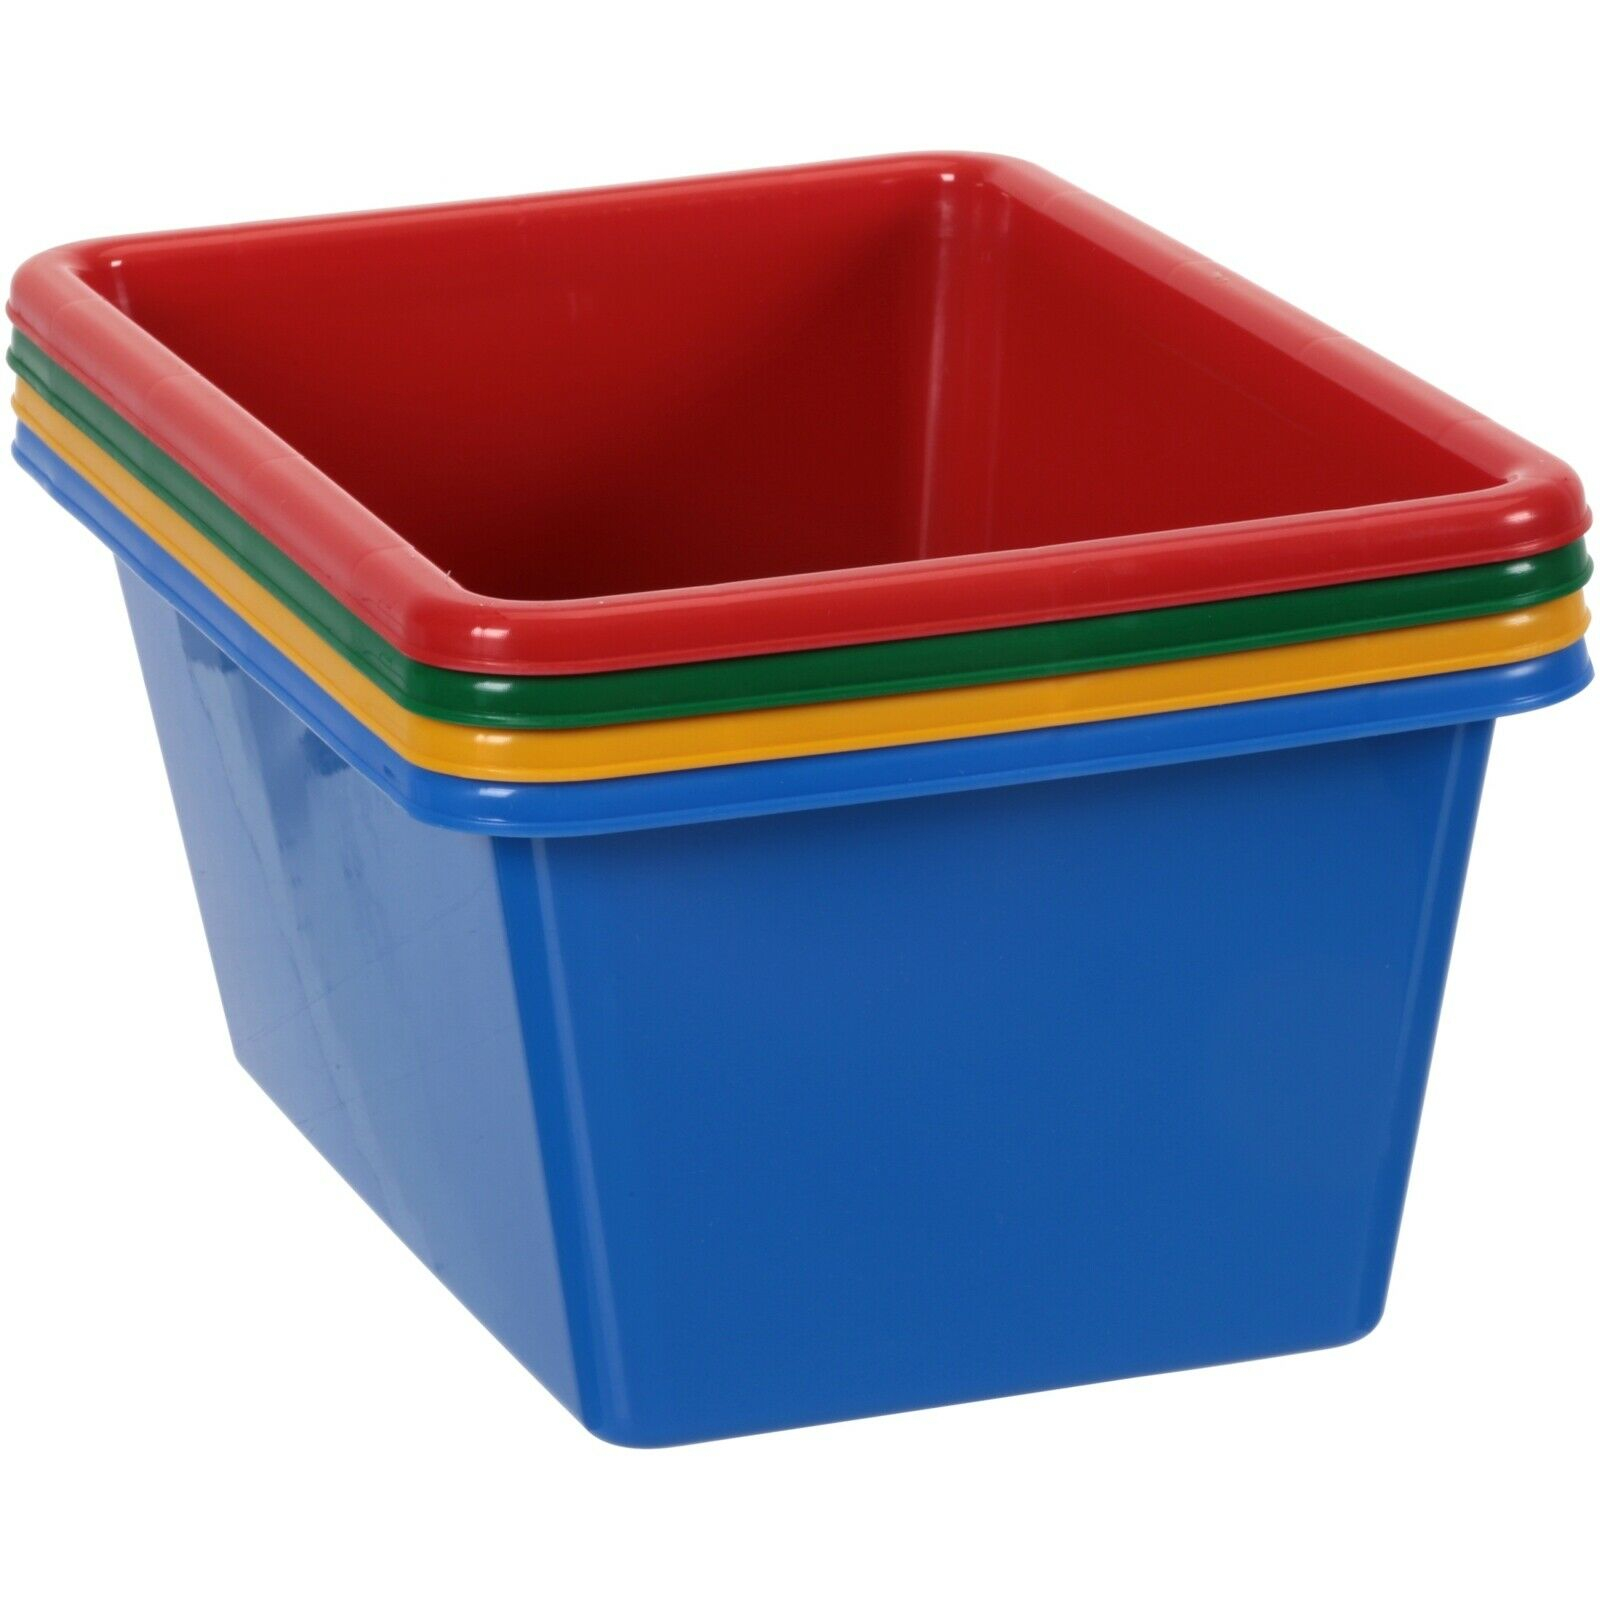 New Tot Tutors Small Bins Primary Color Toy Storage Bins 4 Ct Pack with regard to dimensions 1600 X 1600